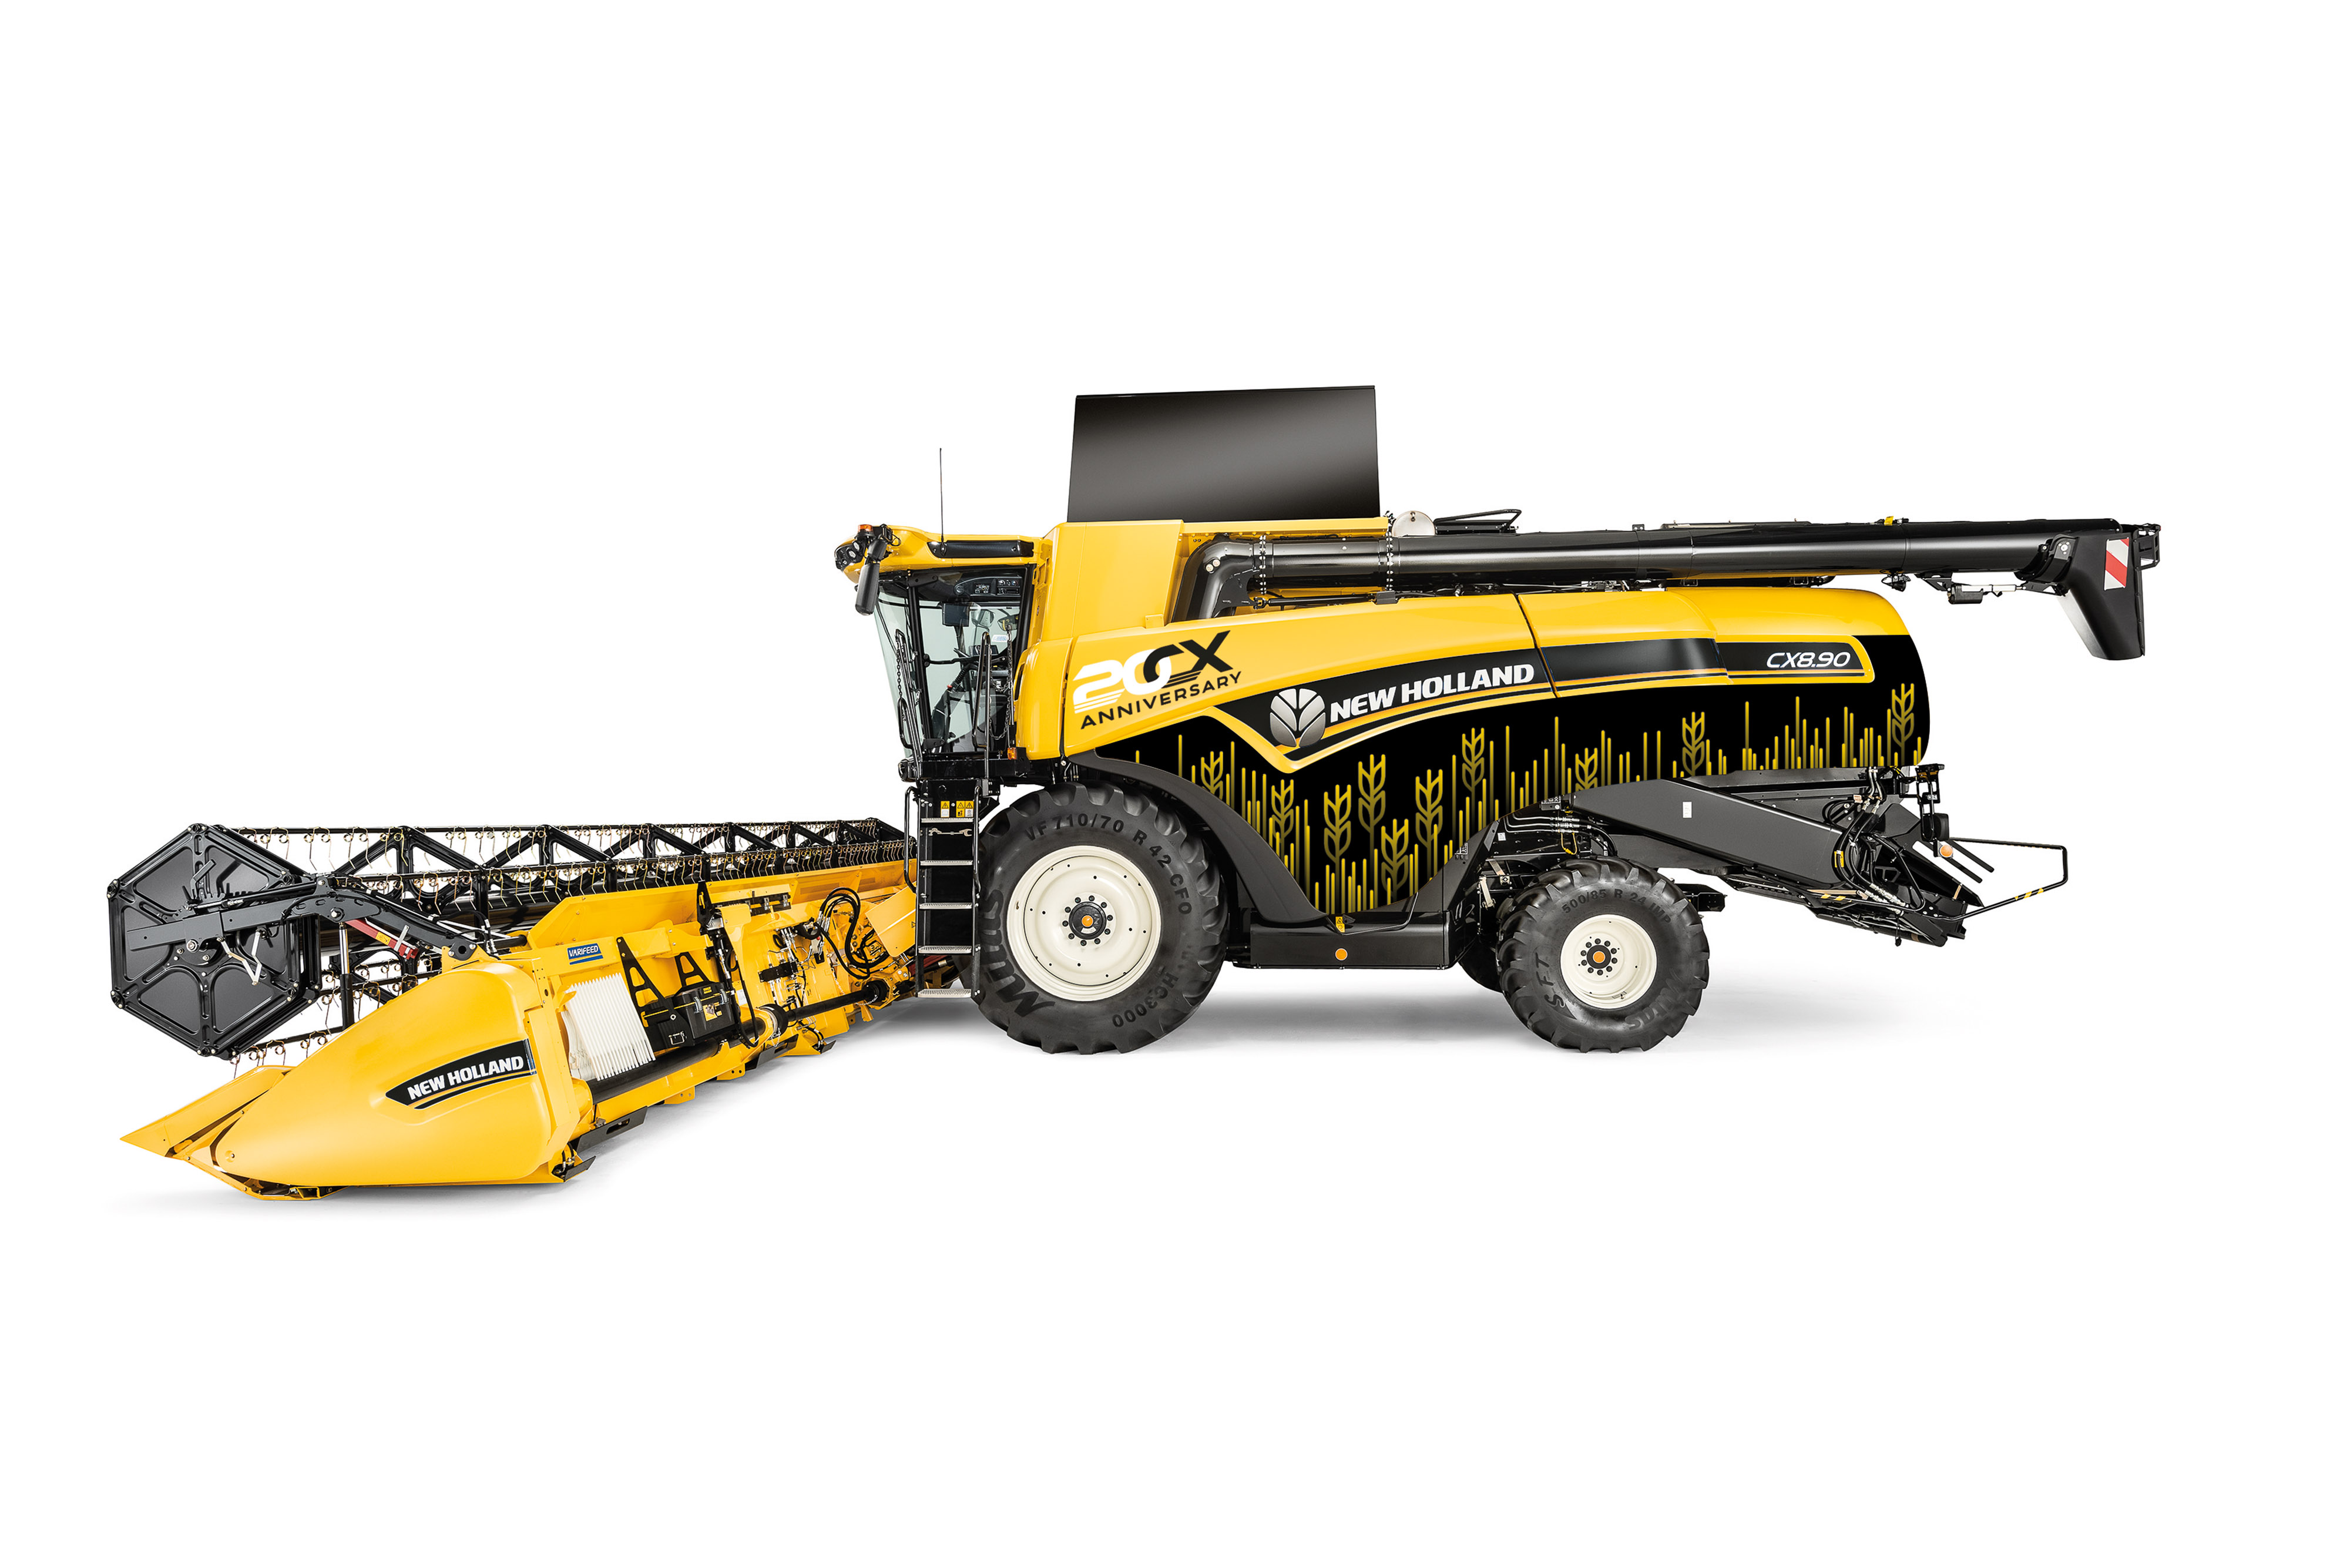 New Holland celebrates 20th Anniversary of CX Flagship combine